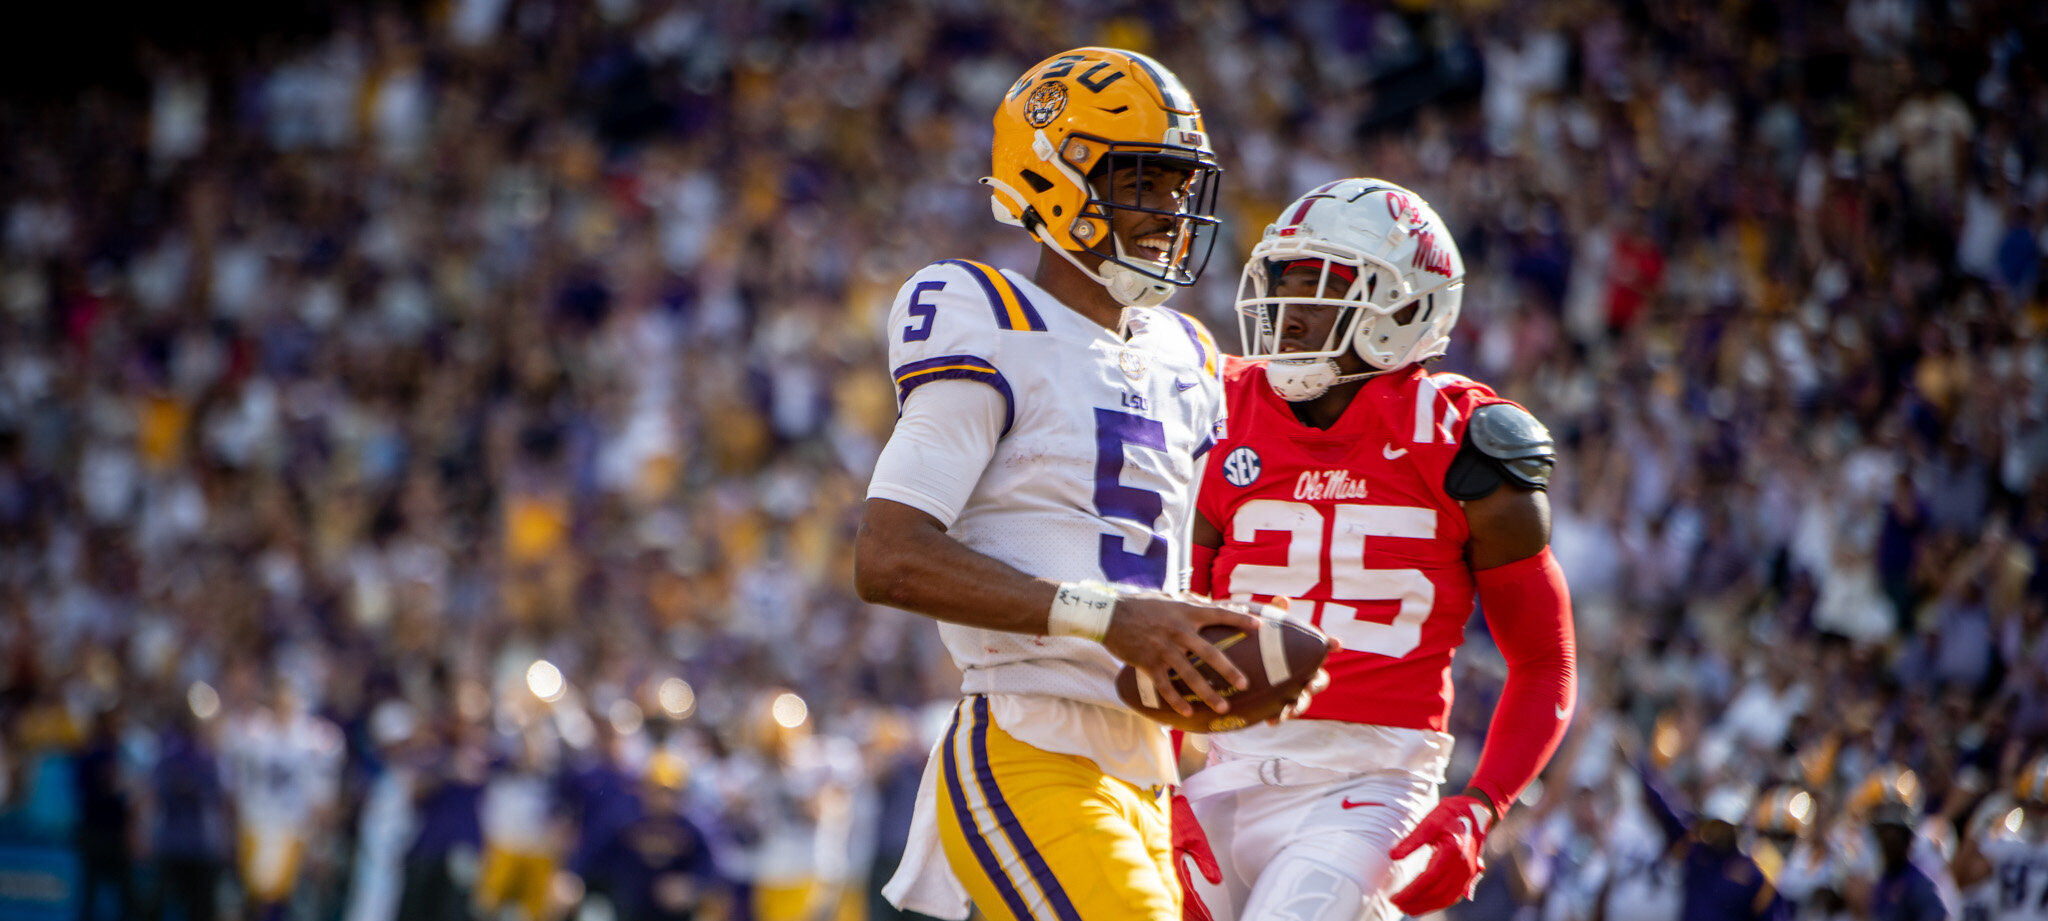 #3 Moment of 2022 Season: LSU Routs Undefeated Ole Miss